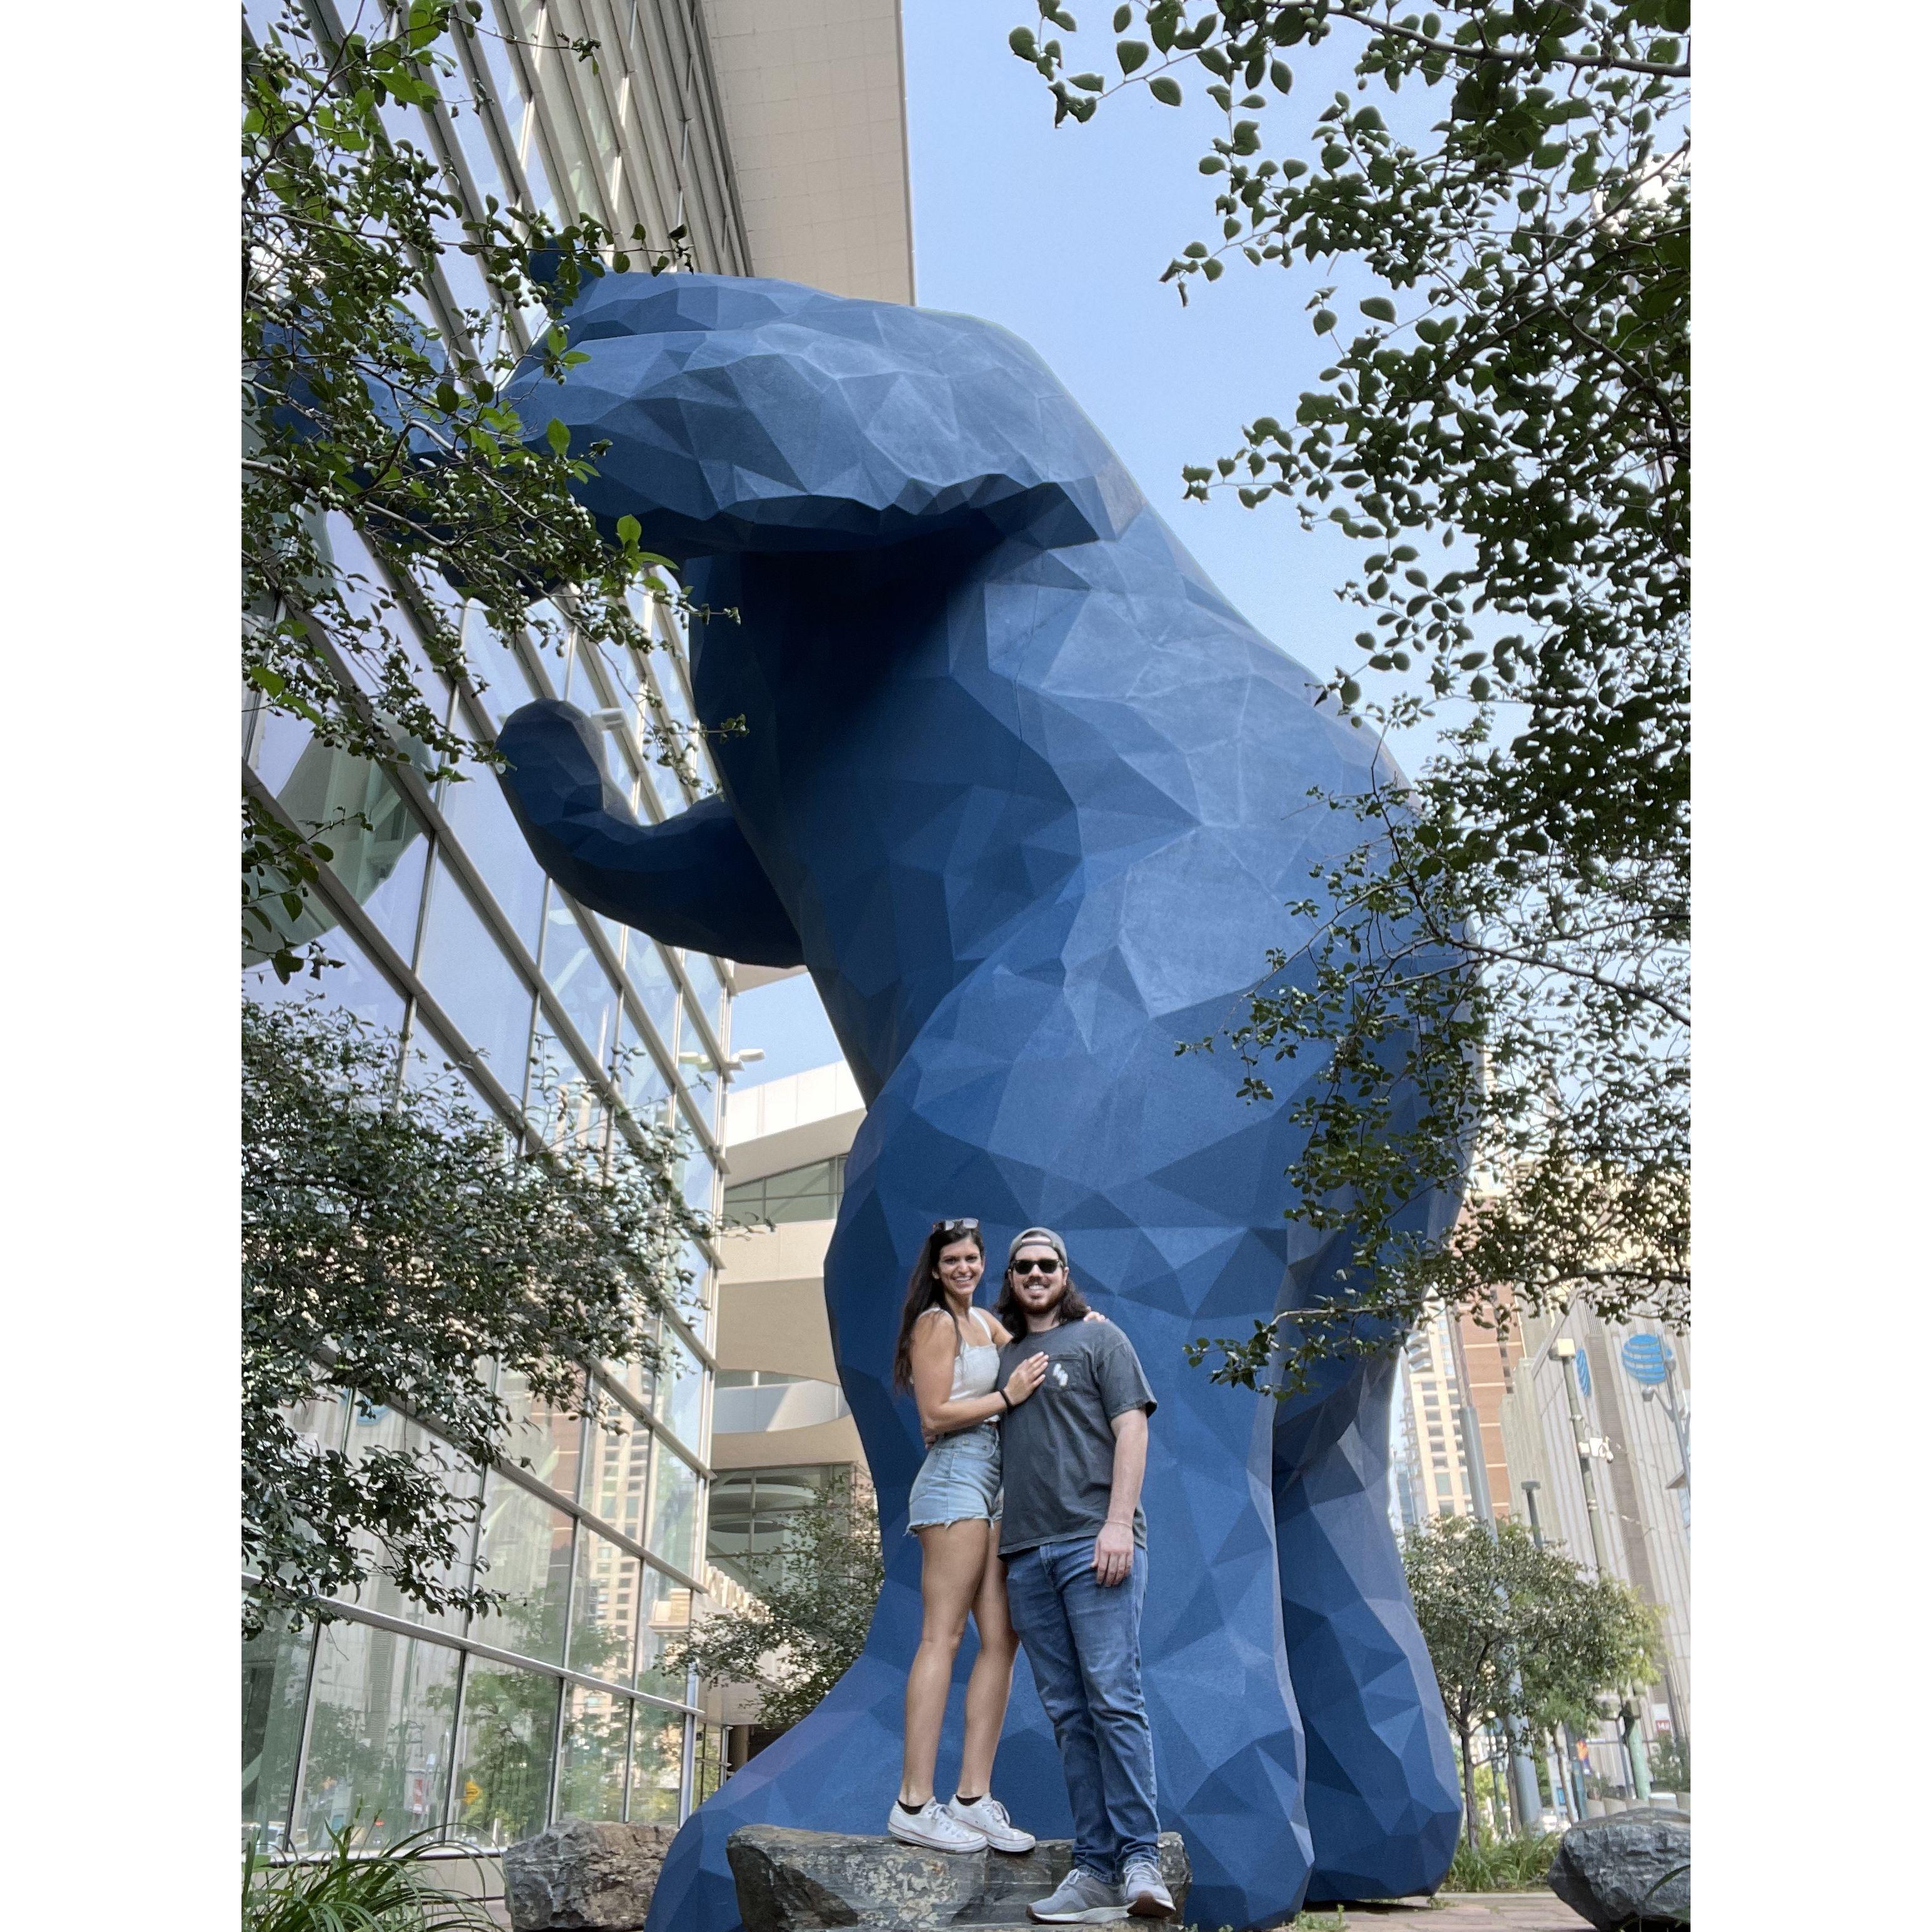 The big blue bear in downtown Denver